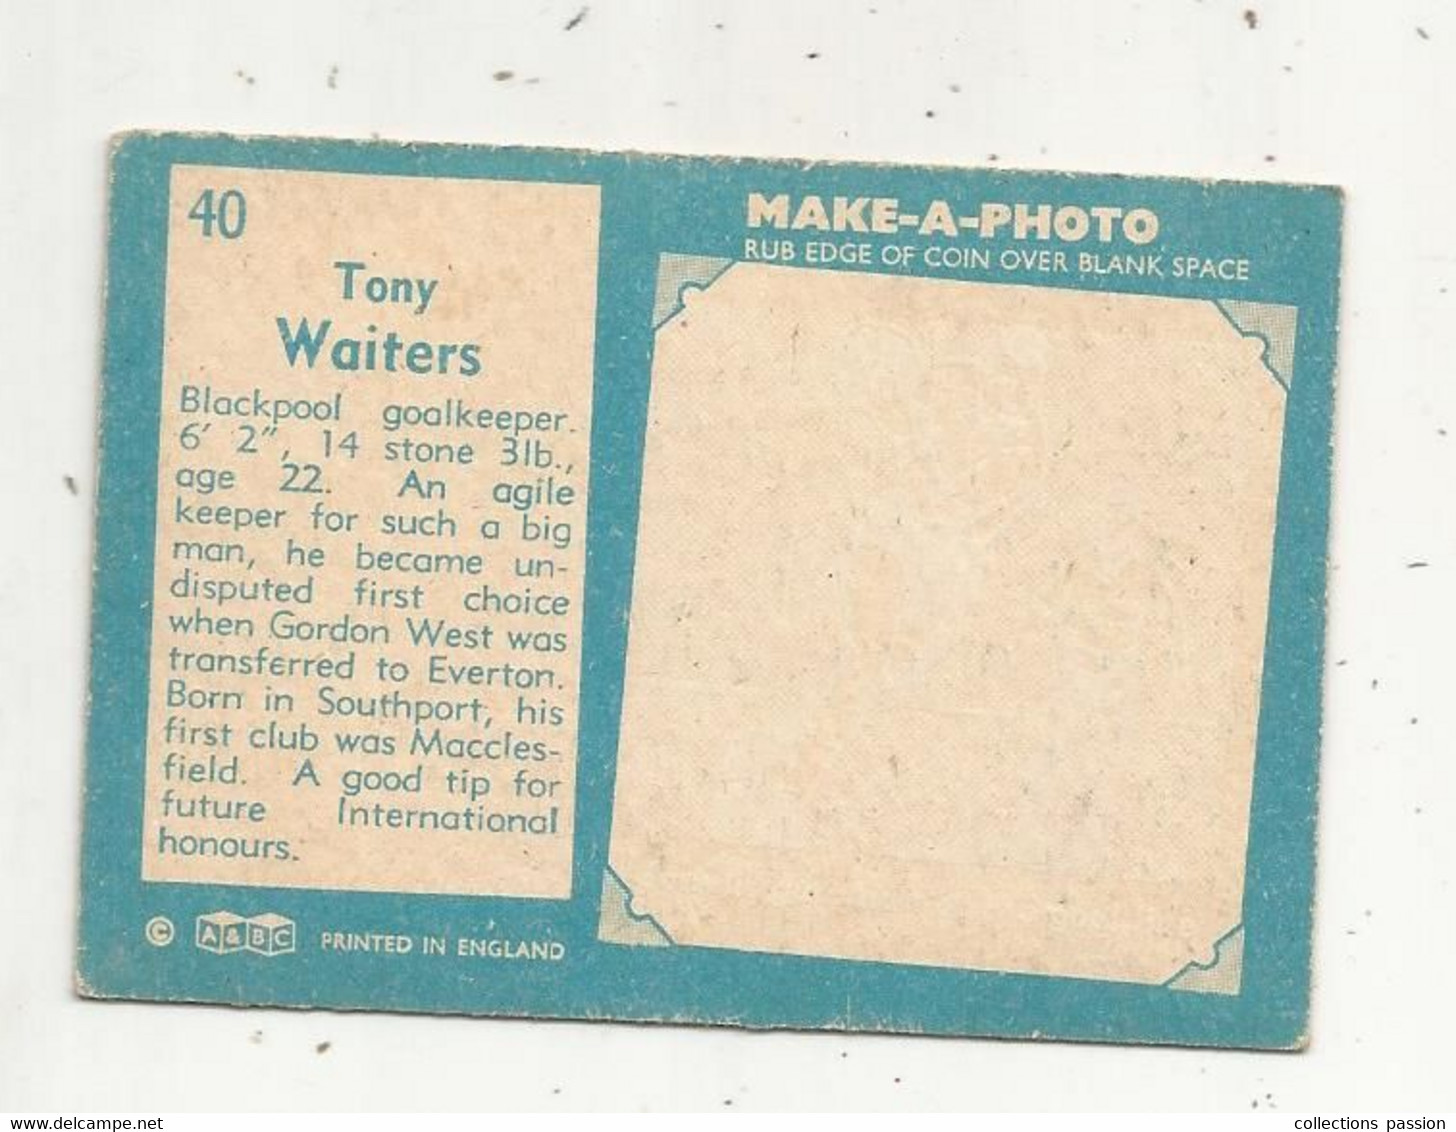 Trading Card , A&BC , England, Chewing Gum, Serie : Make A Photo , Année 60 , N° 40 , TONY WAITERS , Blackpool - Trading Cards